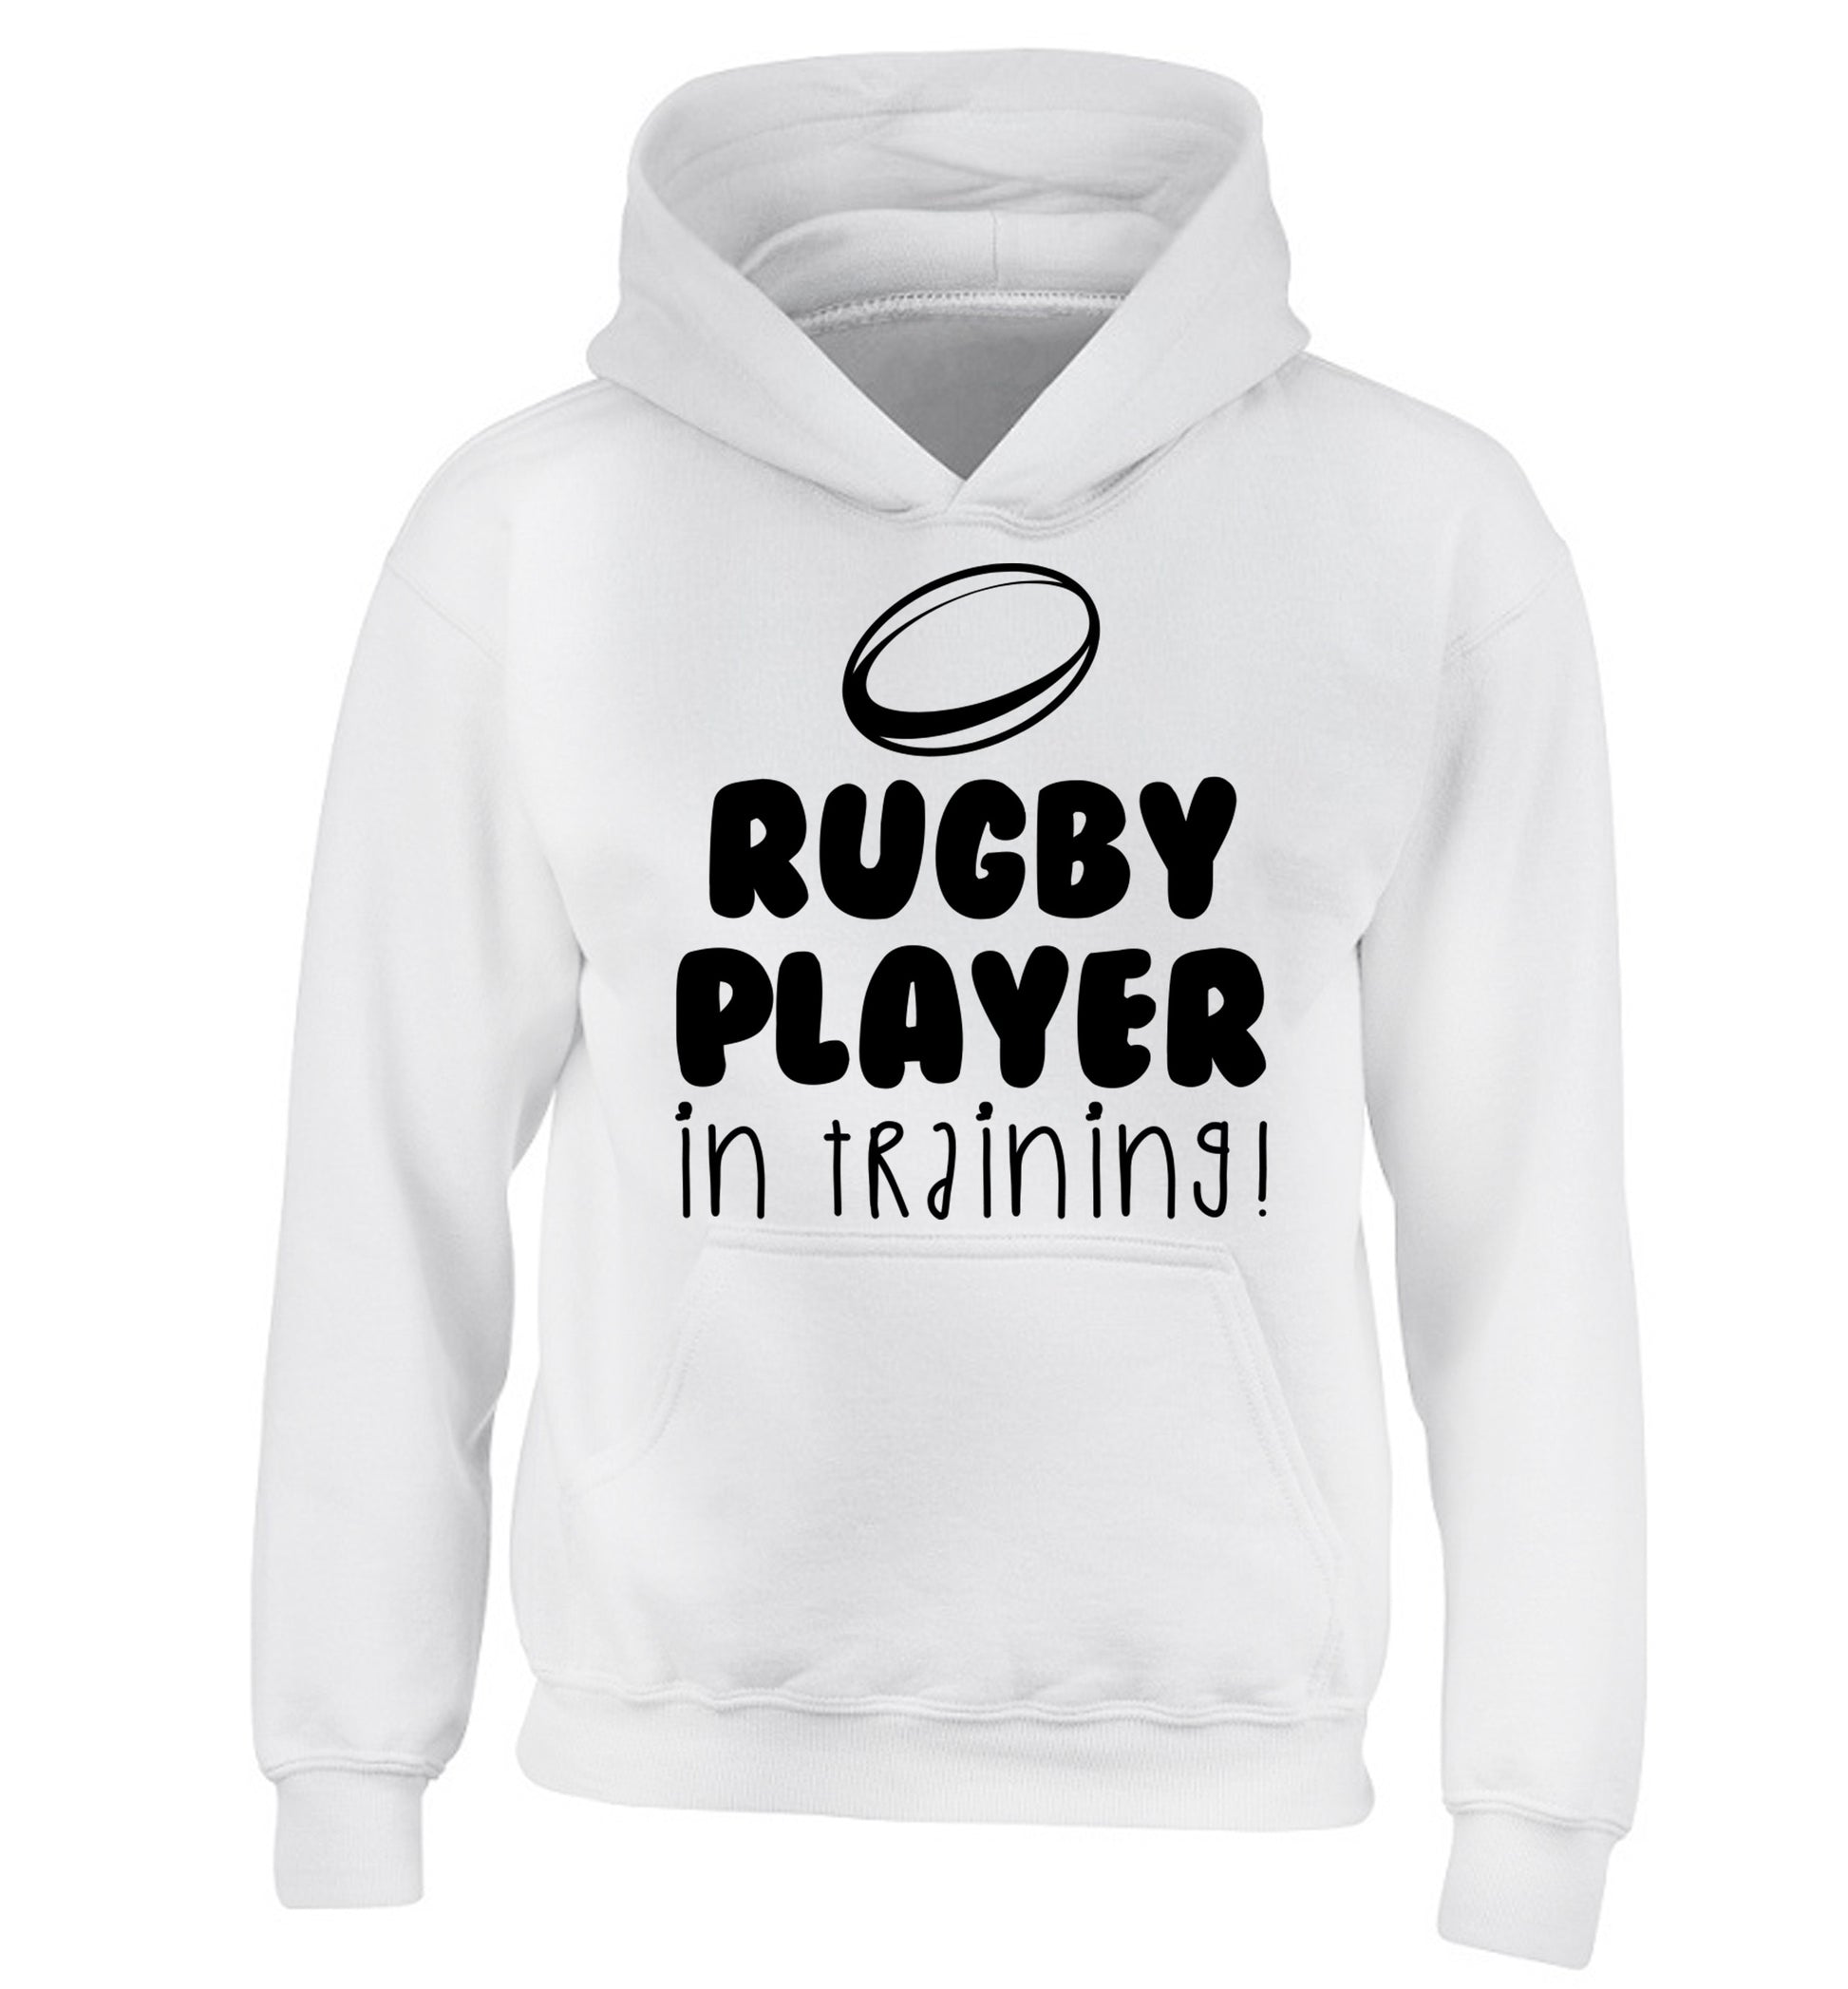 Rugby player in training children's white hoodie 12-14 Years